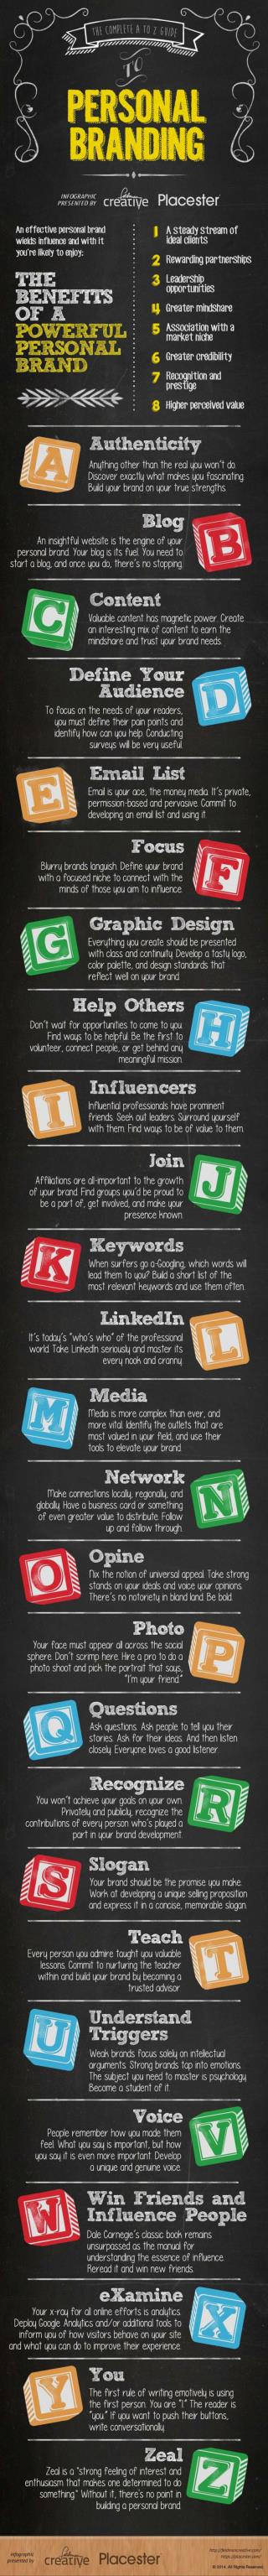 Your Personal Branding Guide - A to Z